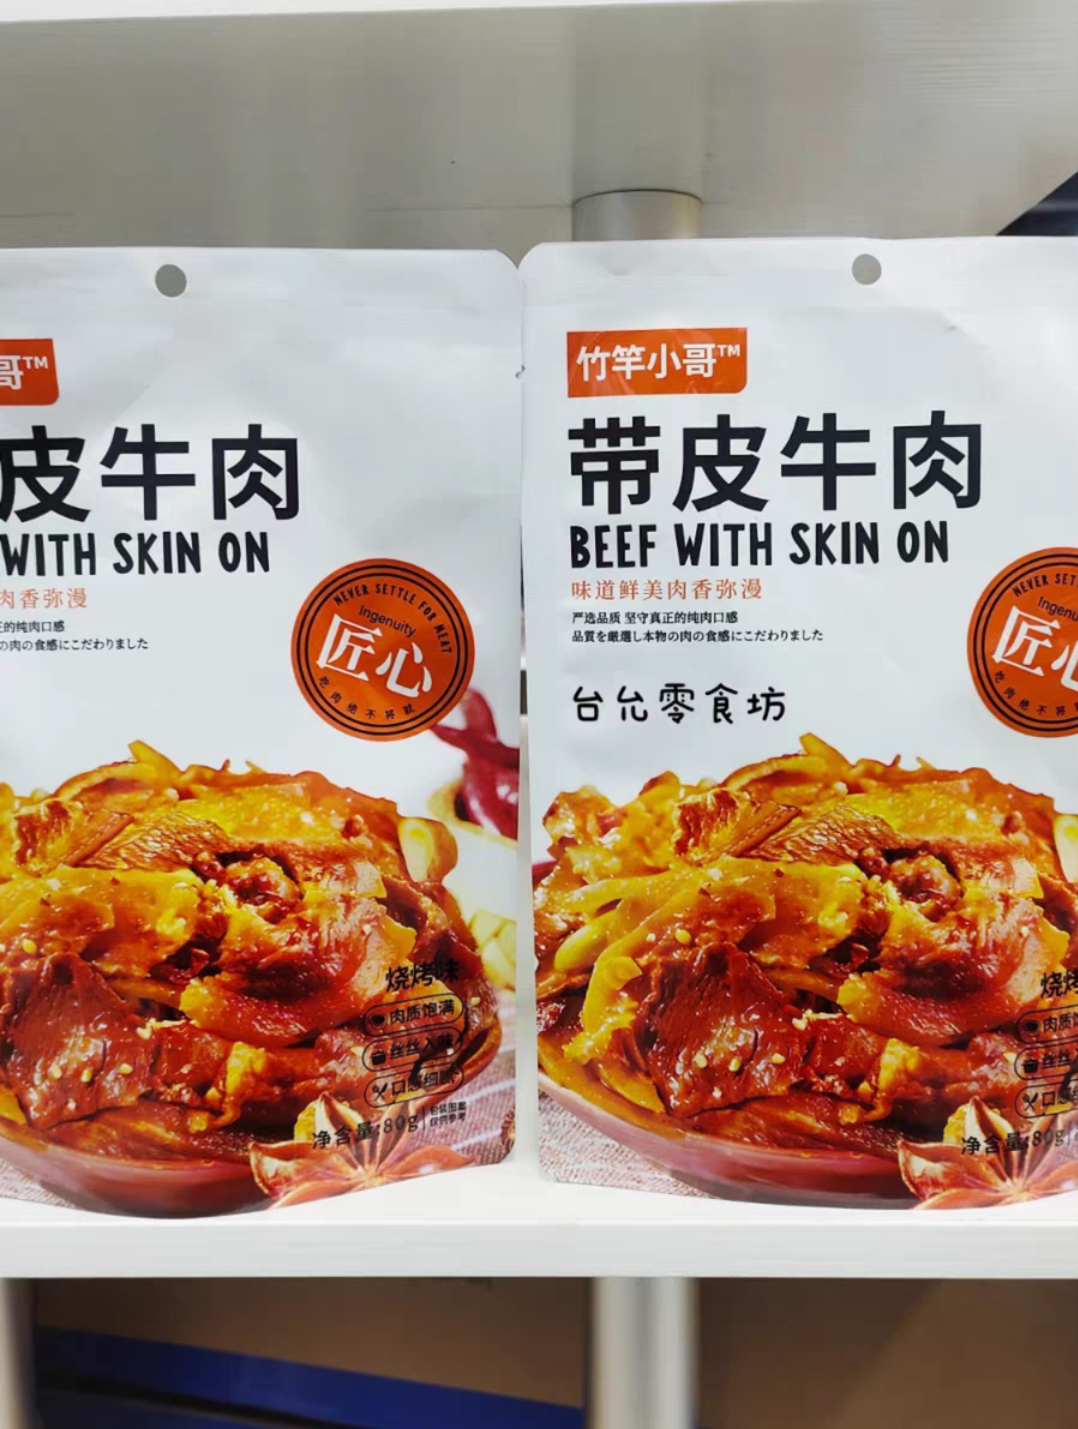 Beef with skin 80g